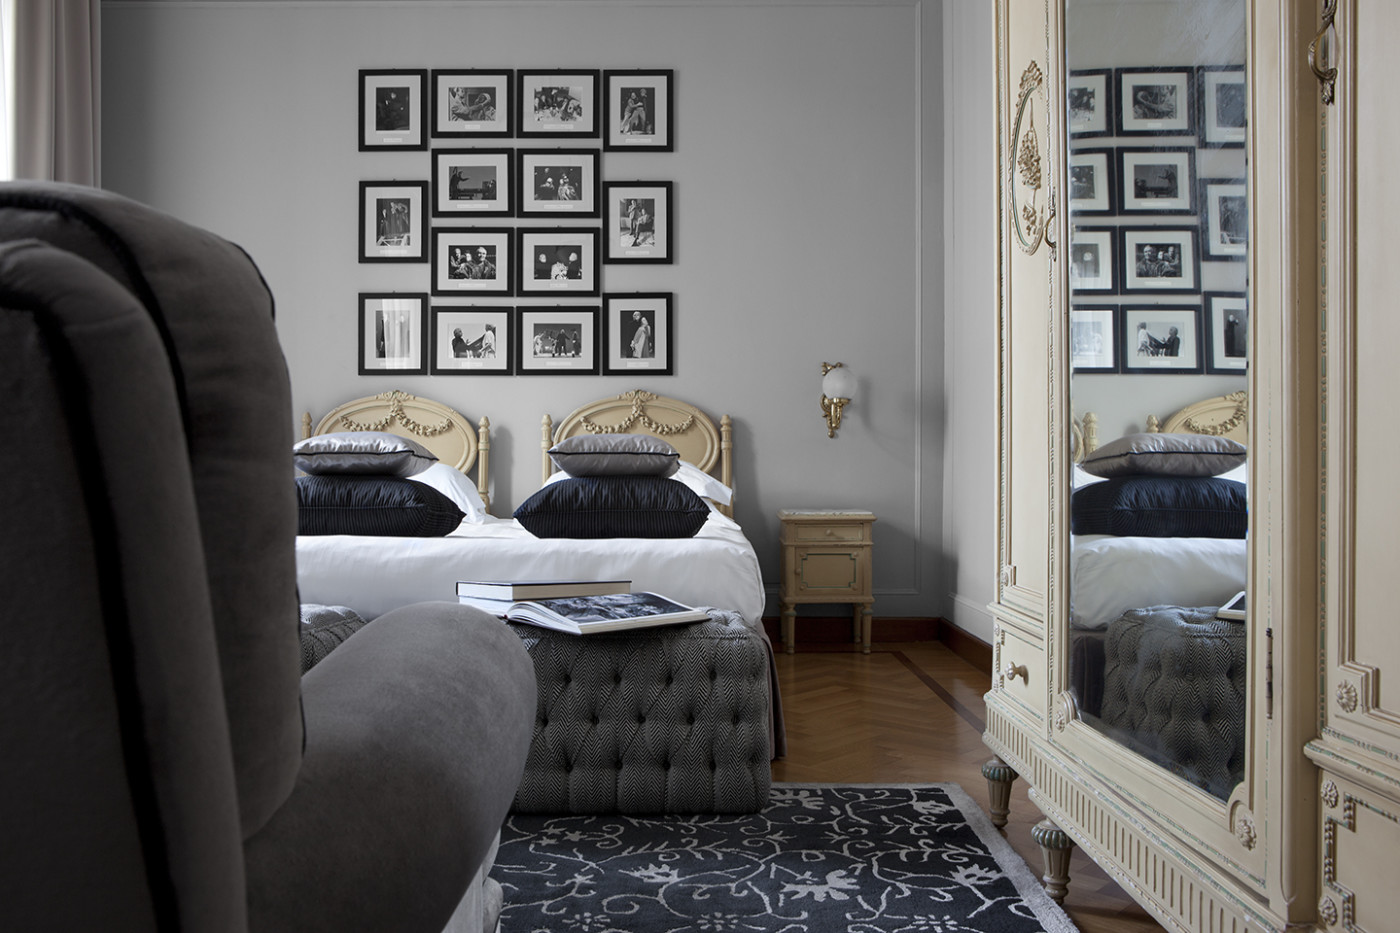 it's not all over for grey, the grand hotel et de milan by studio dimore, image by Beppe Brancato